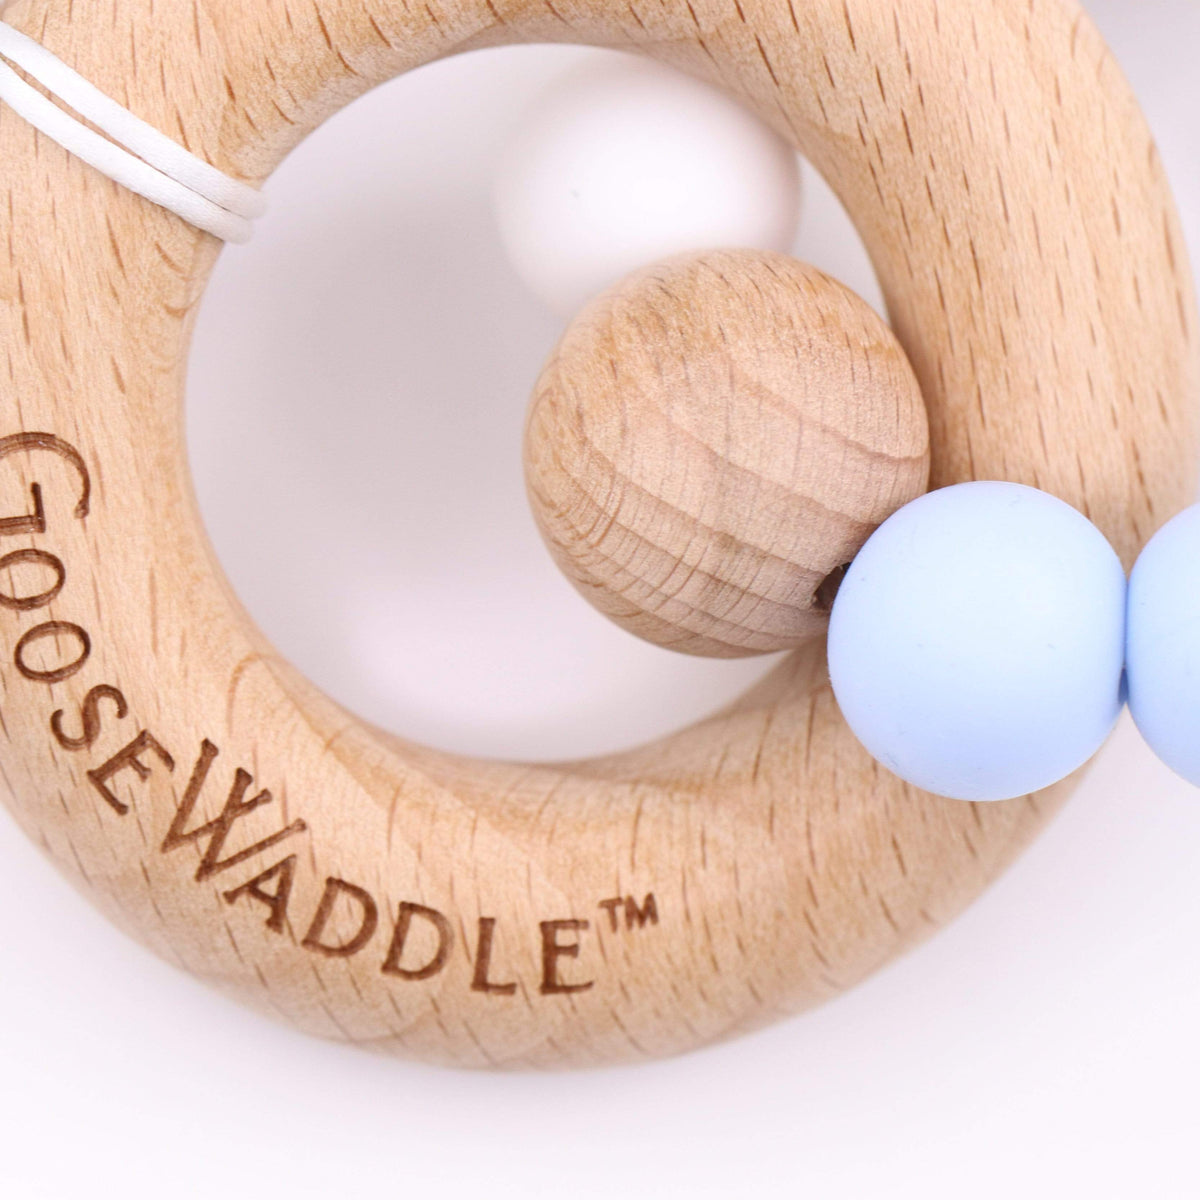 Goosewaddle Teether Wooden and Silicone Teether - Blue Imperial Distribution